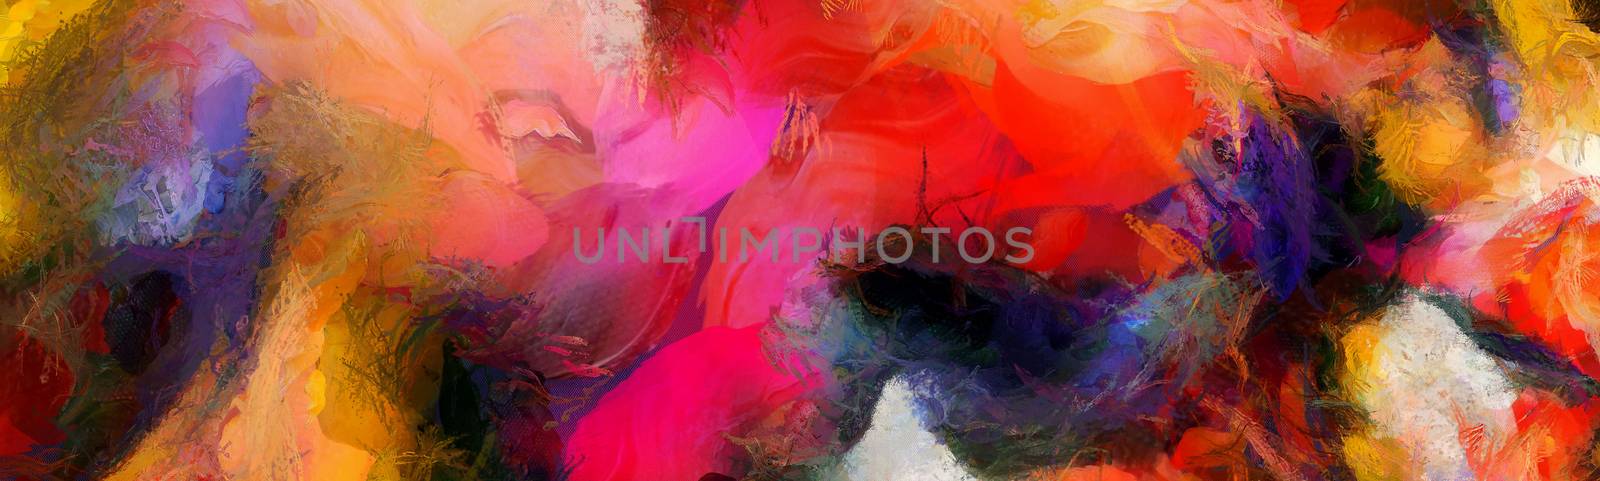 Vivid Abstract Painting. Wide brush strokes